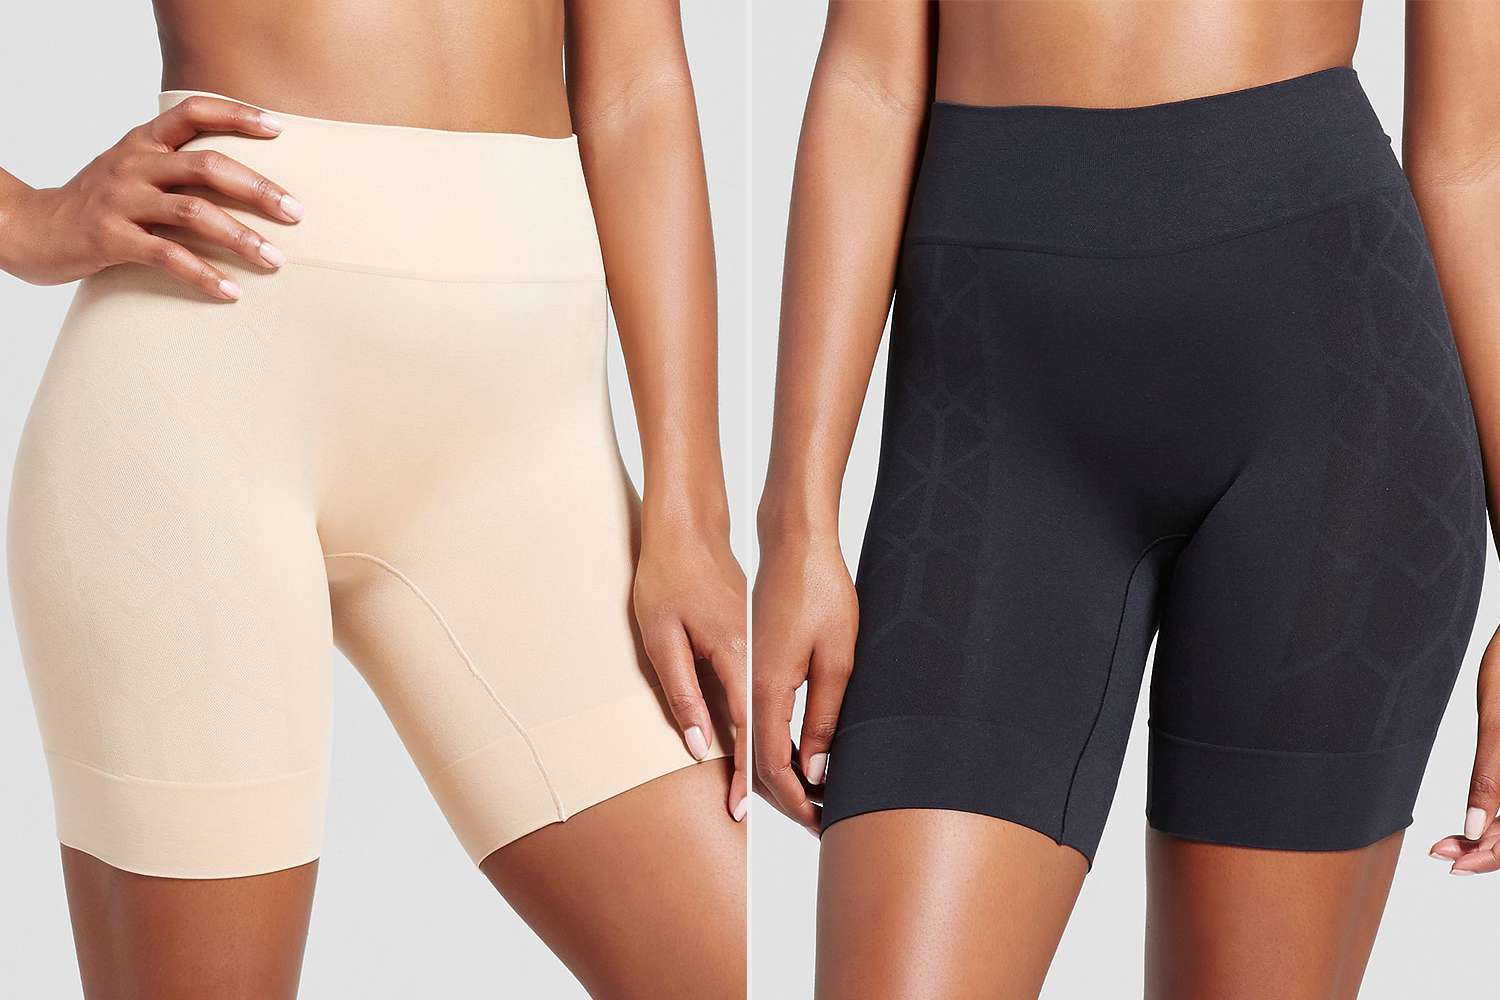 Anti-Chafing Shorts Cost Just $12 